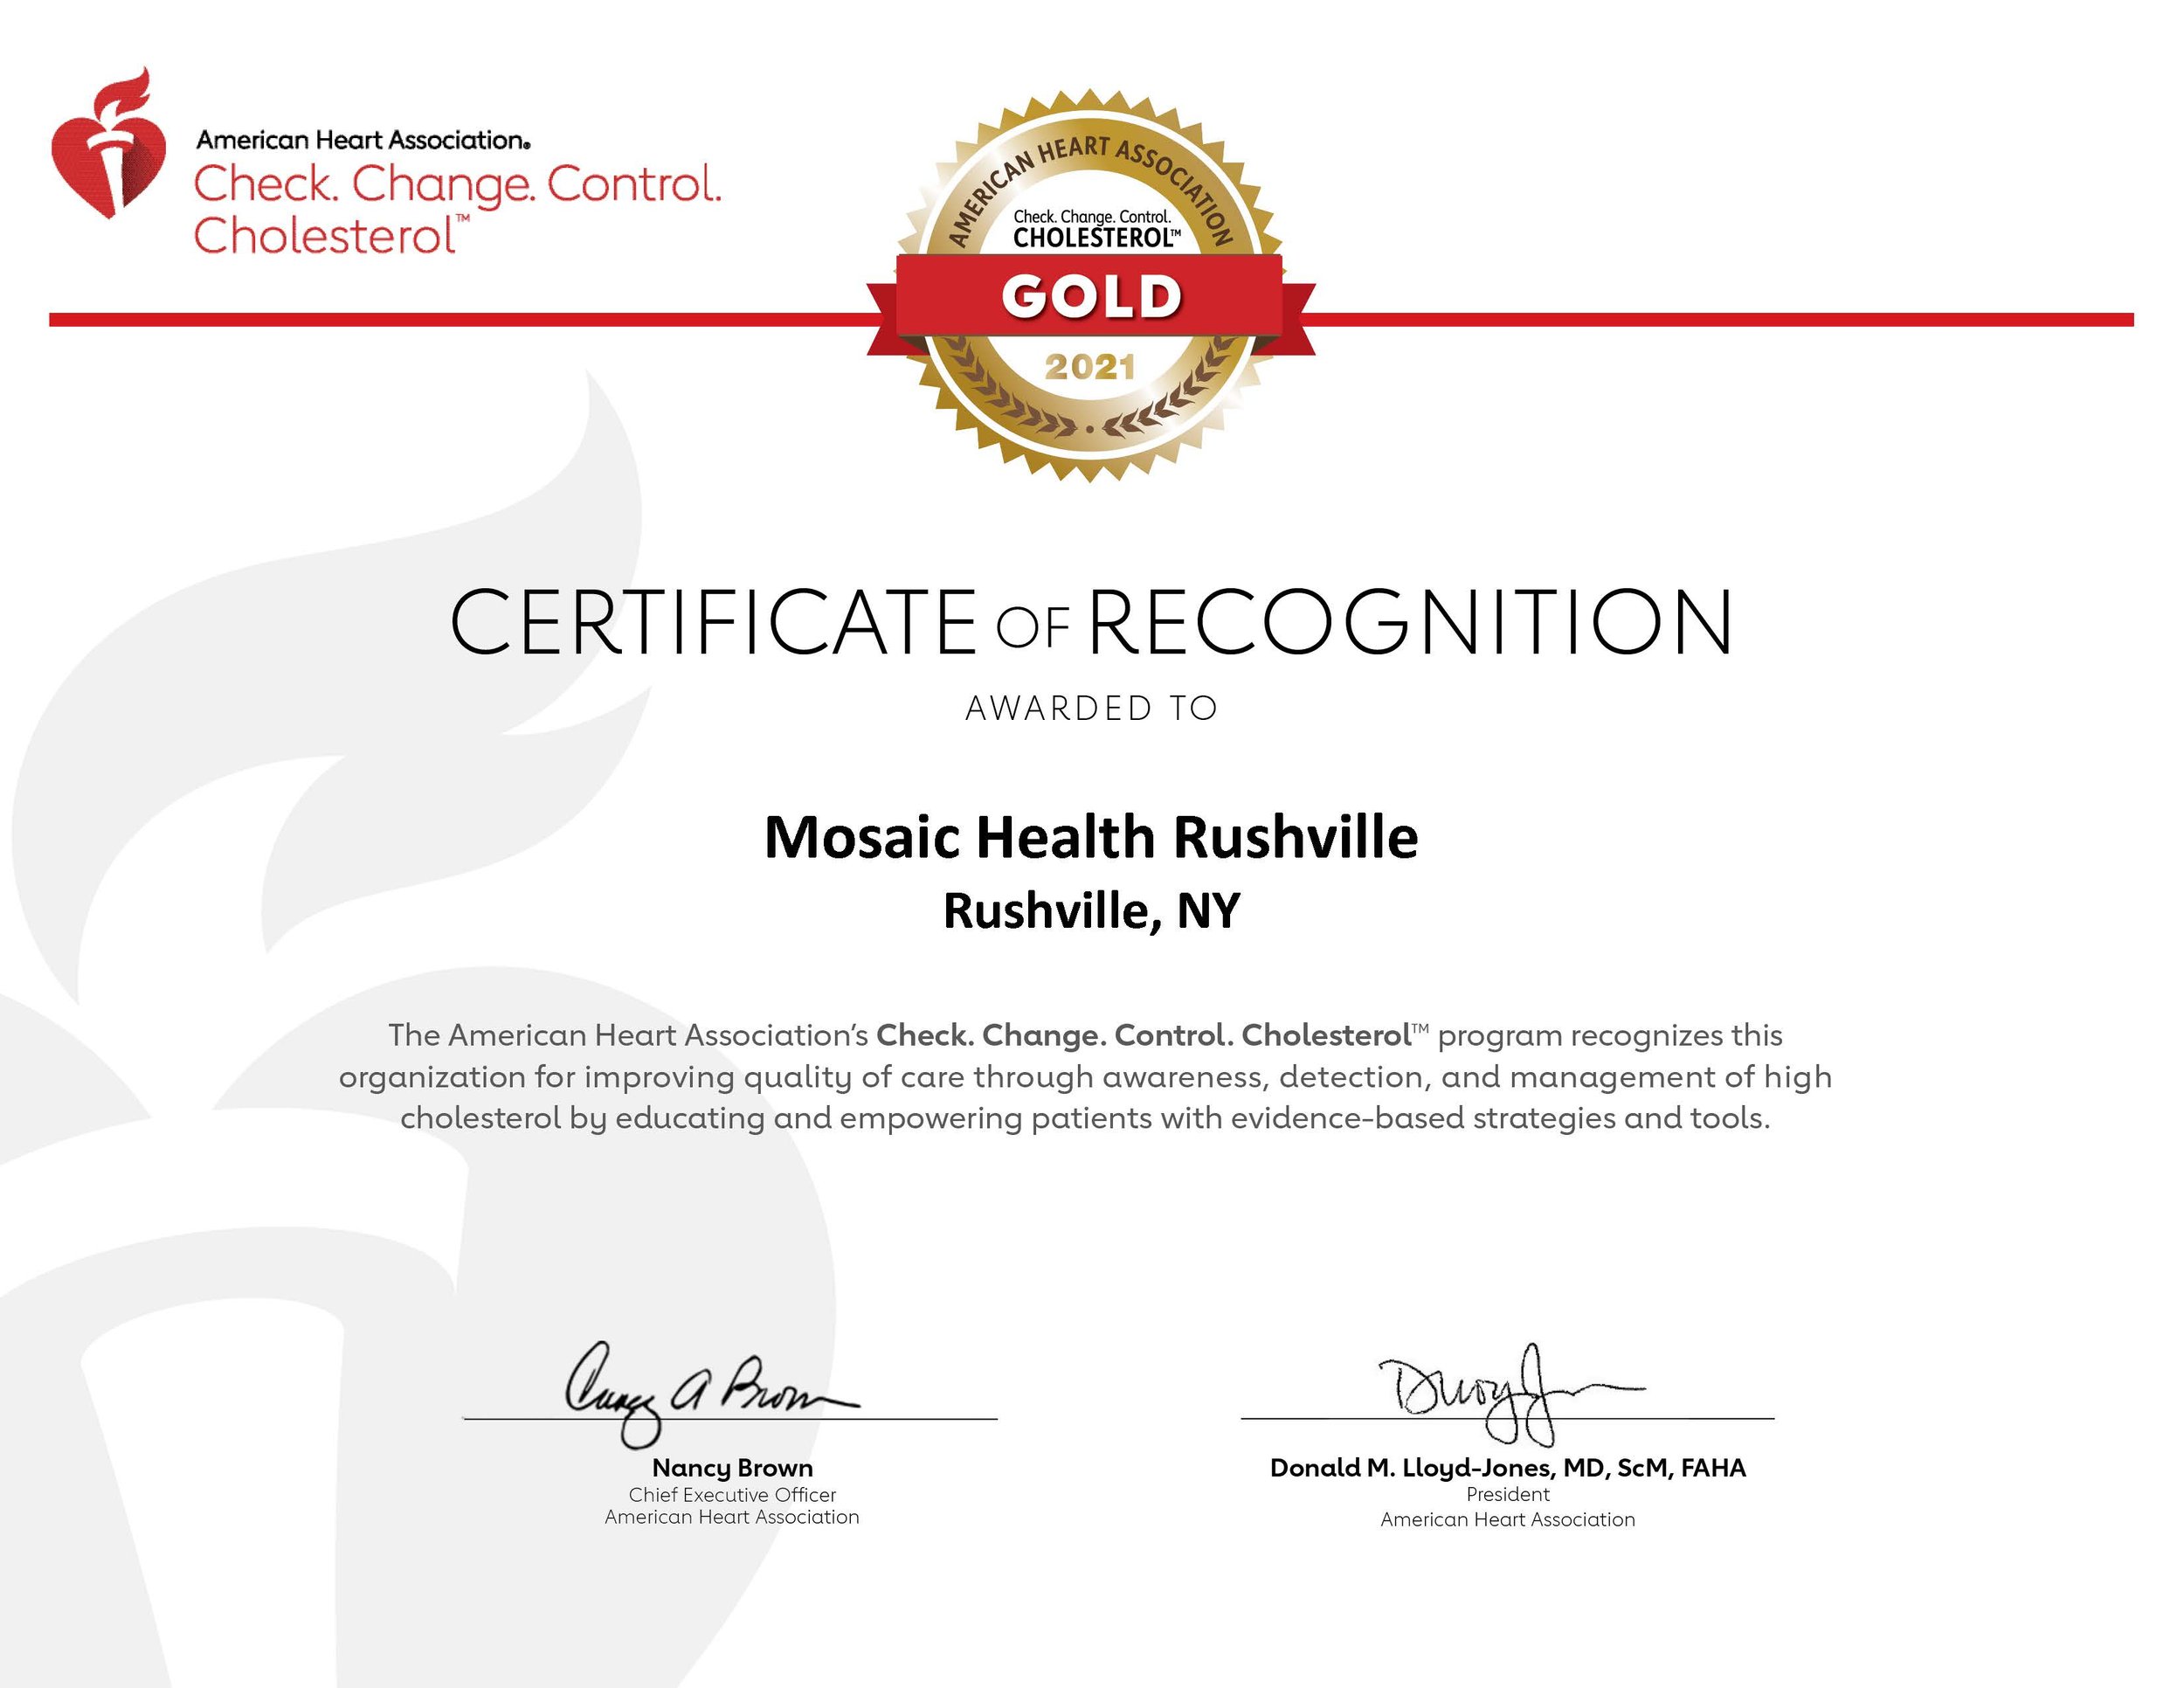 CCCC_CERTIFICATE_GOLD 2021 - Mosaic Health Rushville - NY.jpg